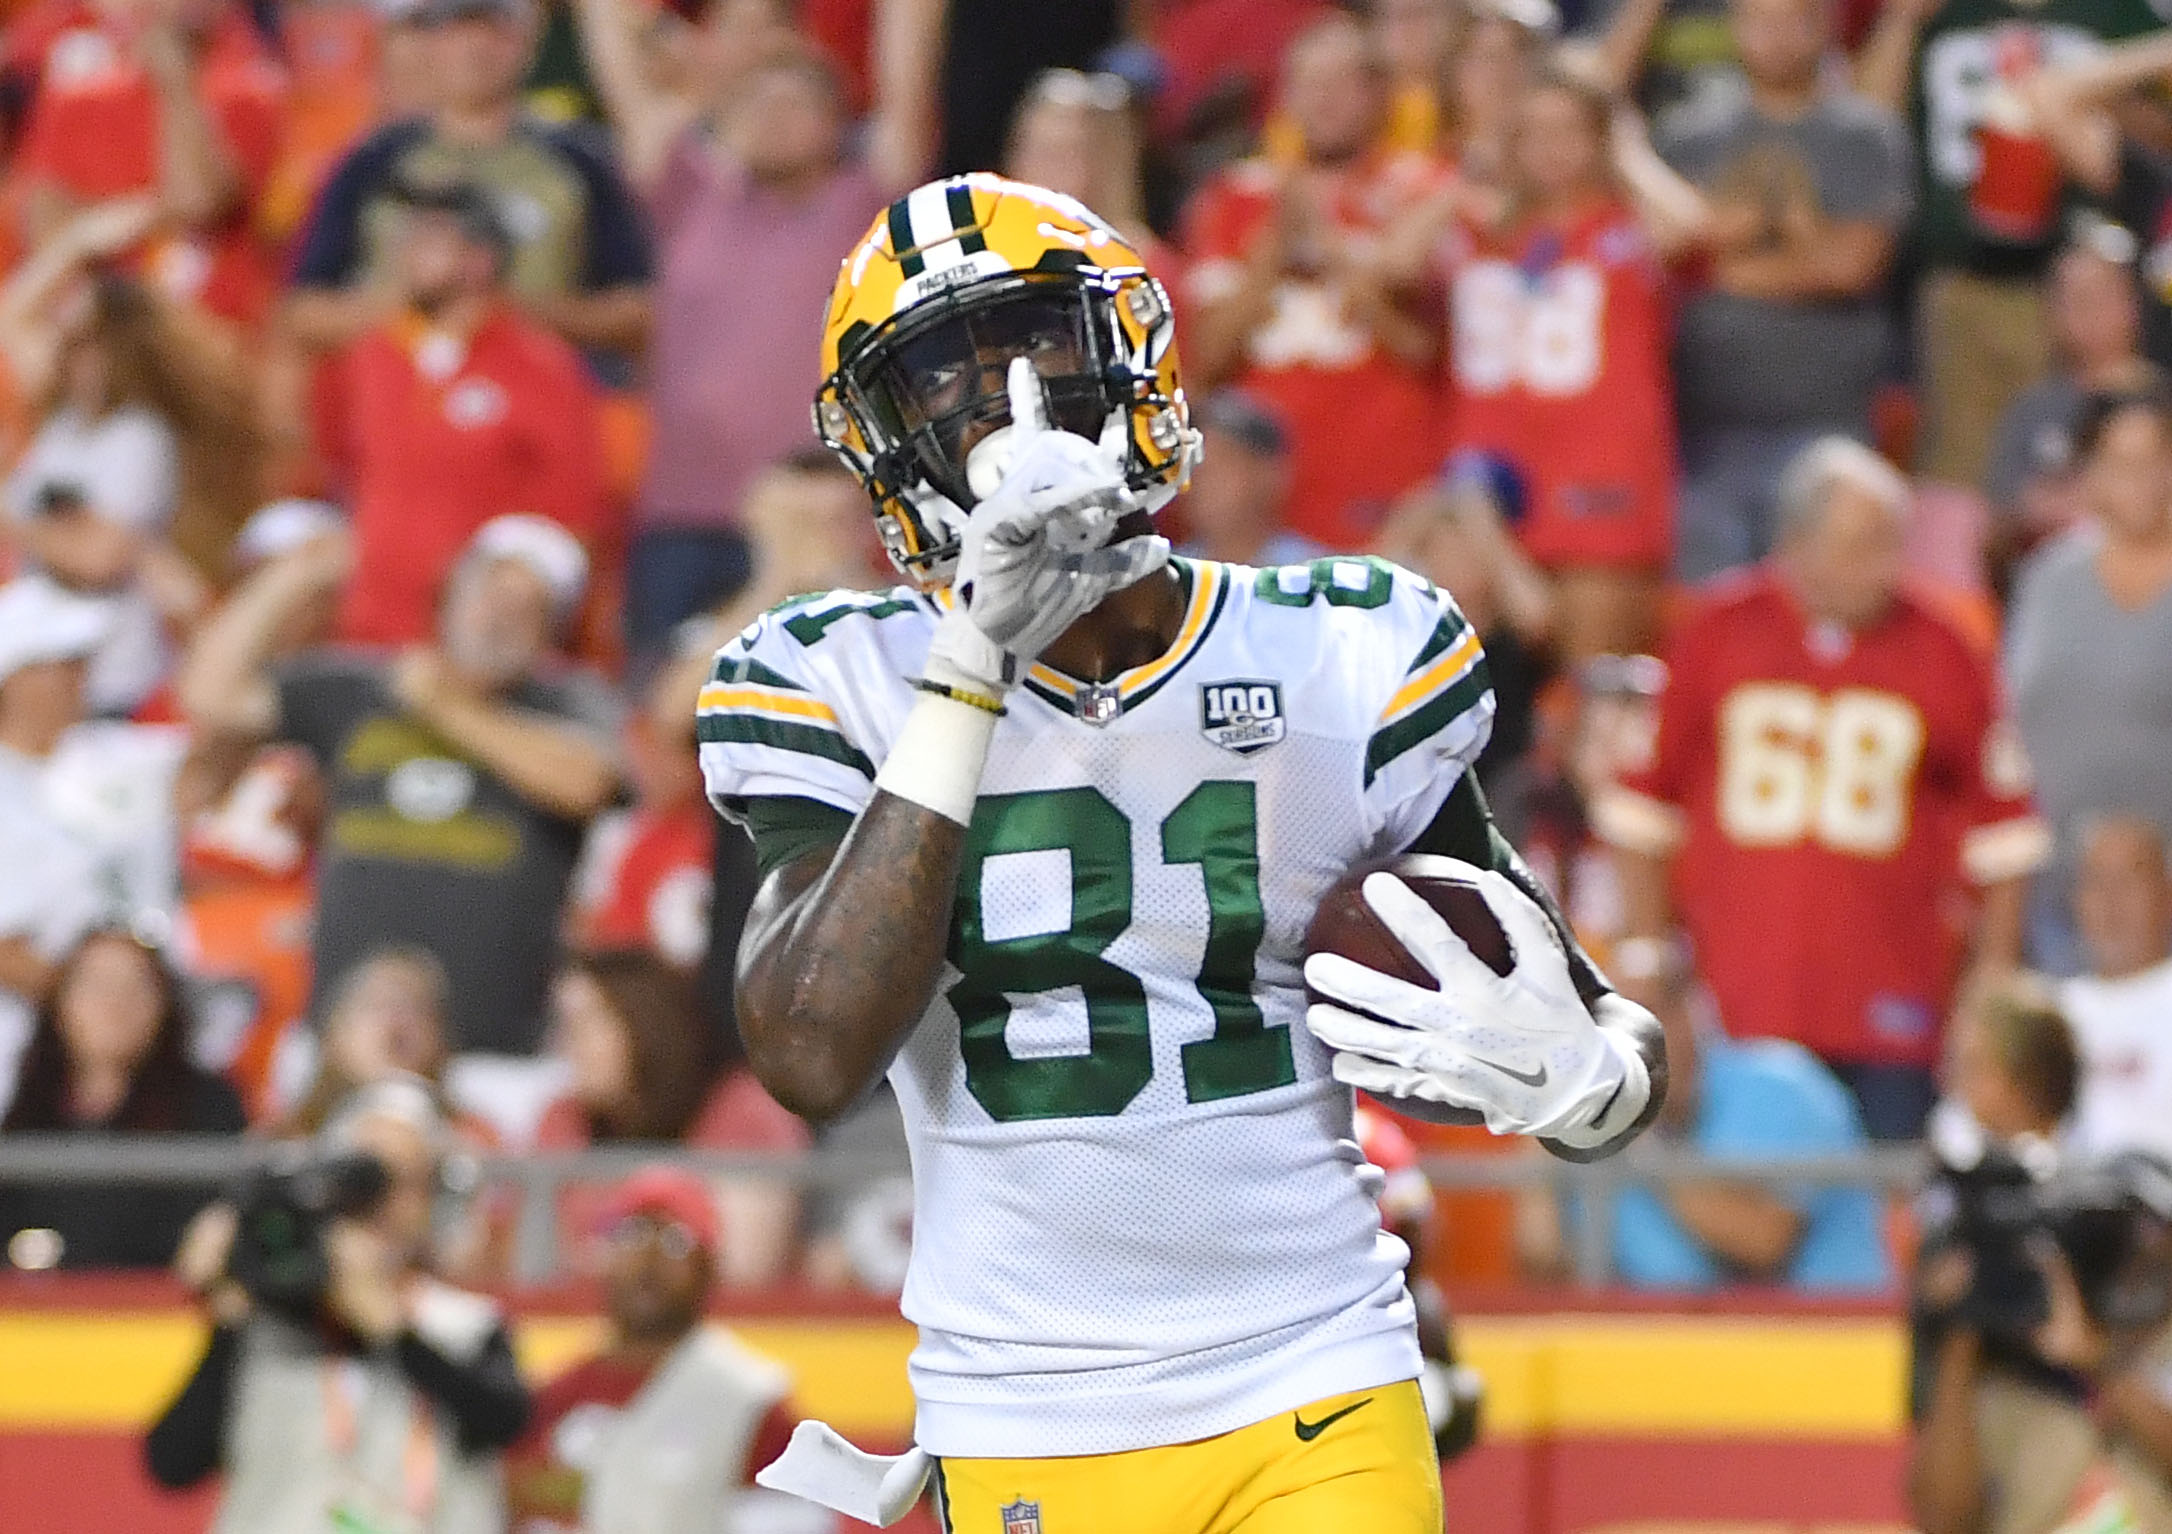 Battle Looms for Third RB Spot for Packers